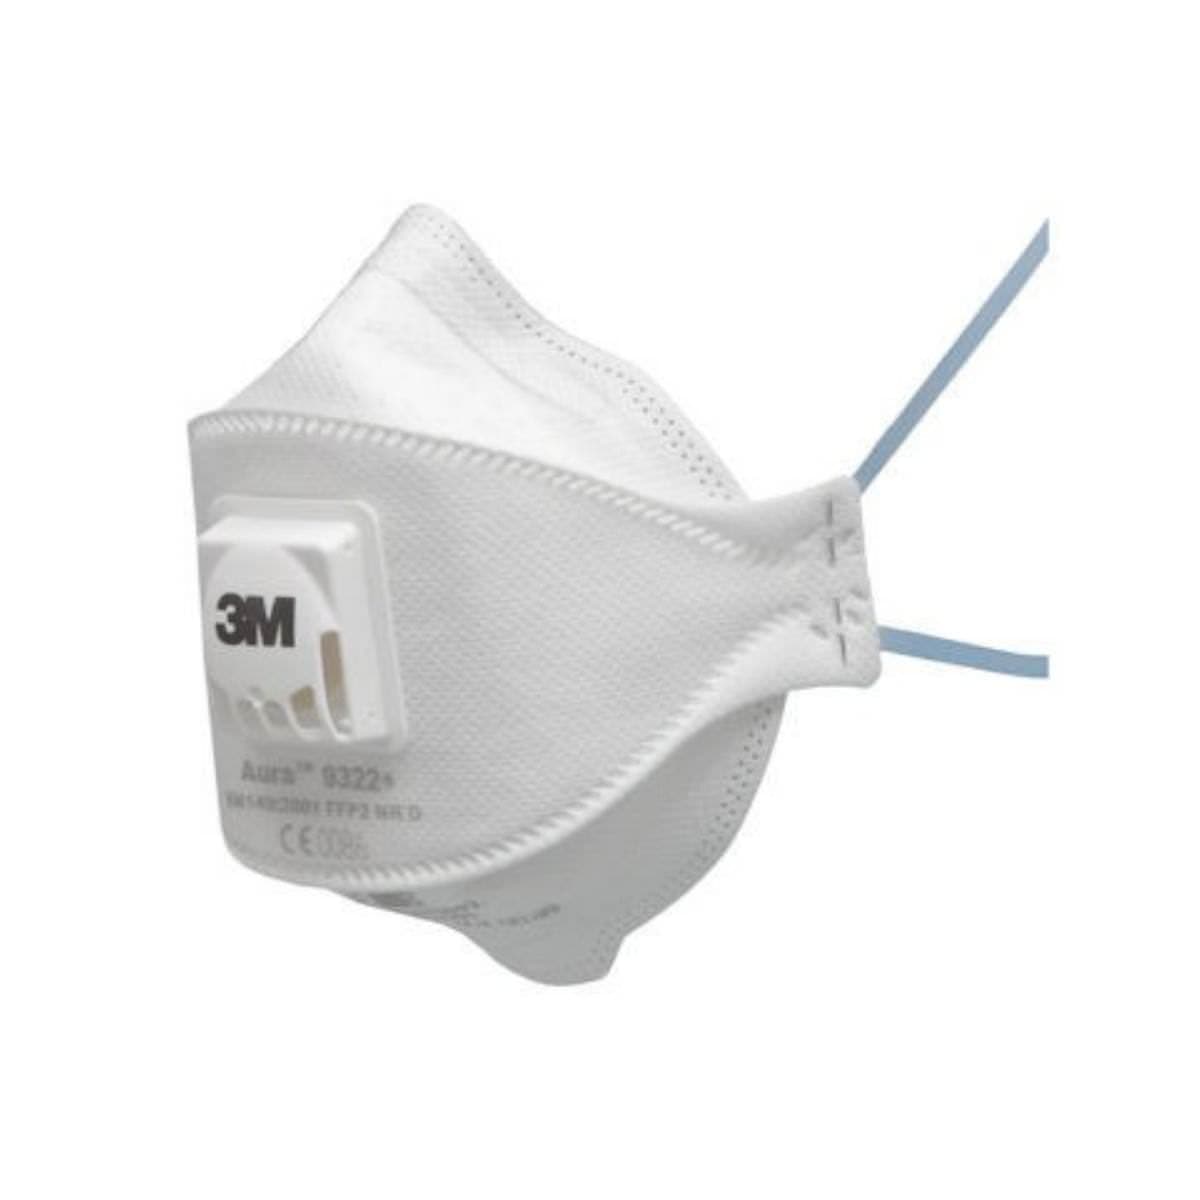 3M™ Particulate Respirator 9322A (Pack of 10)